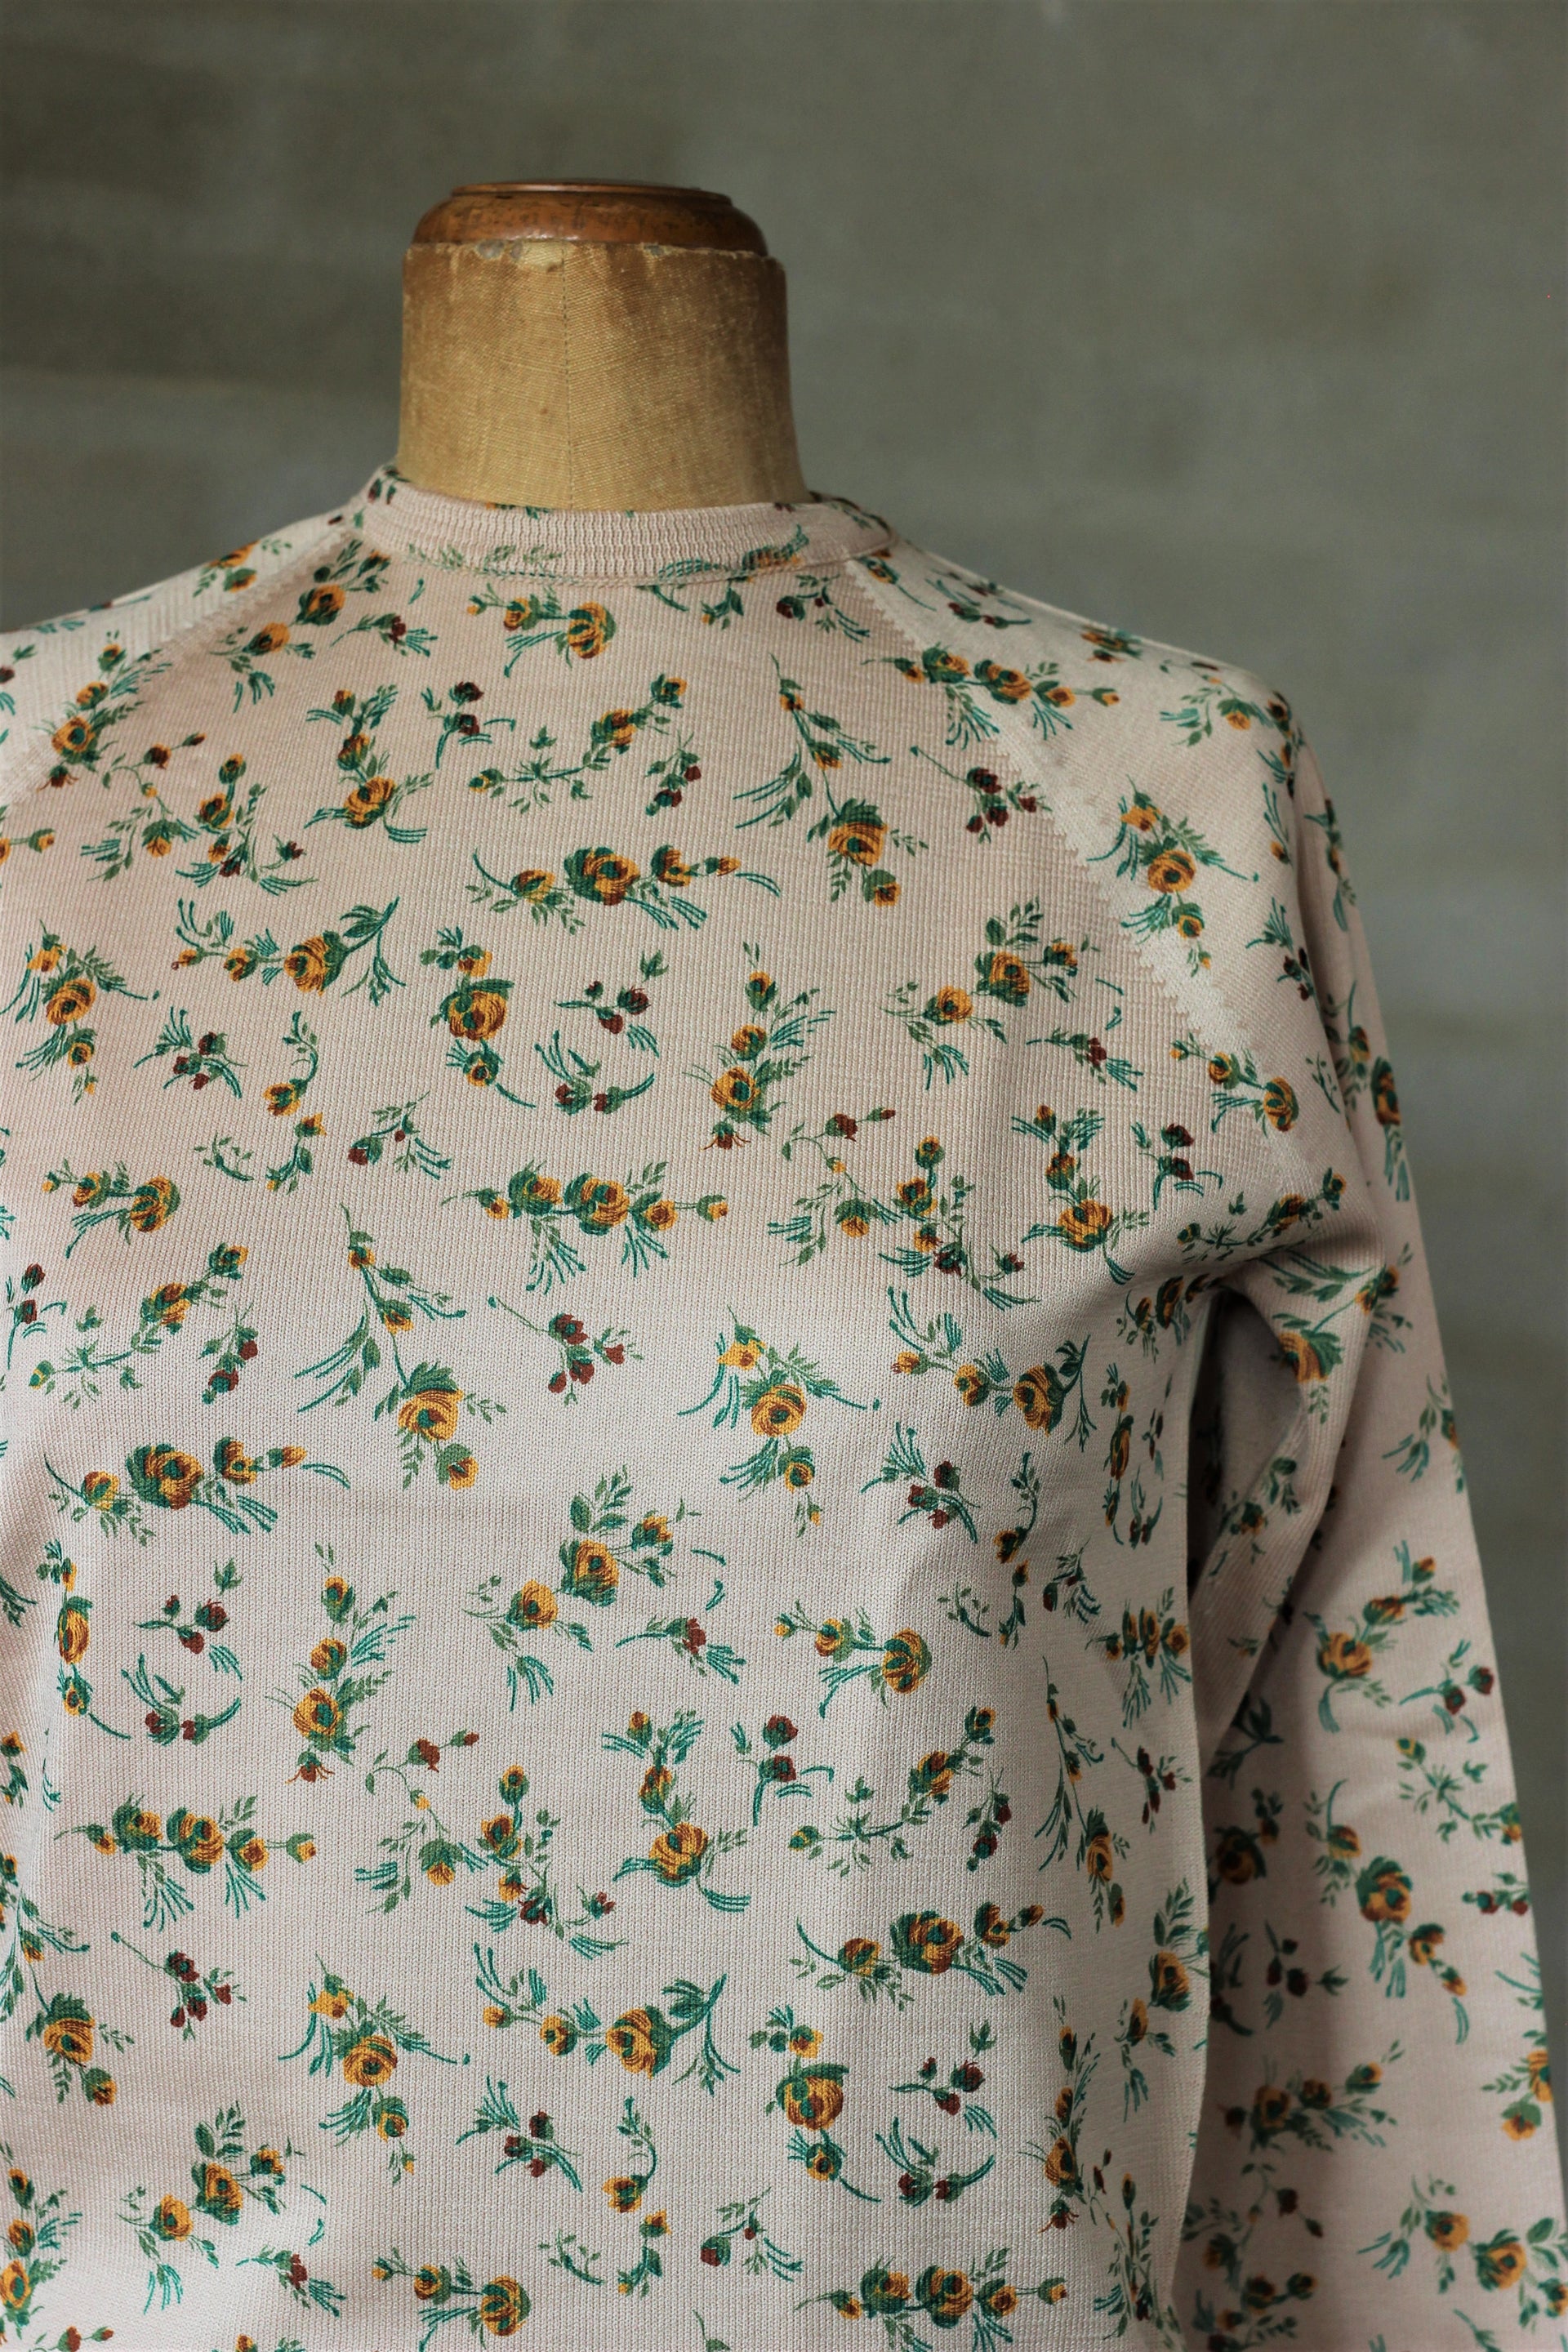 1970s DEADSTOCK Vtg. Top With Yellow Green Rose Pattern//Size S      T15